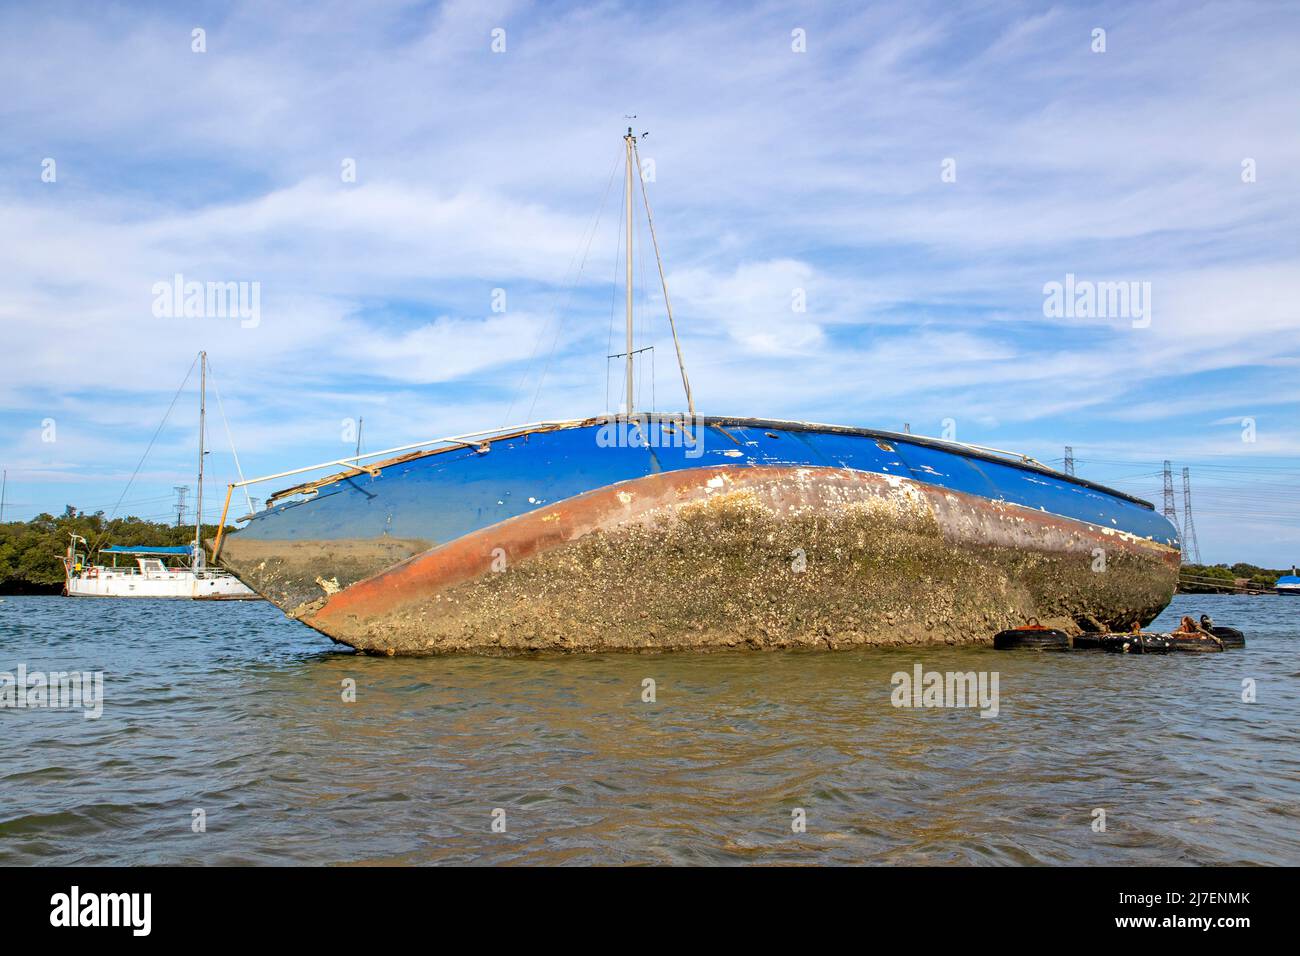 Wrecked yacht in the Port River, Adelaide Stock Photo